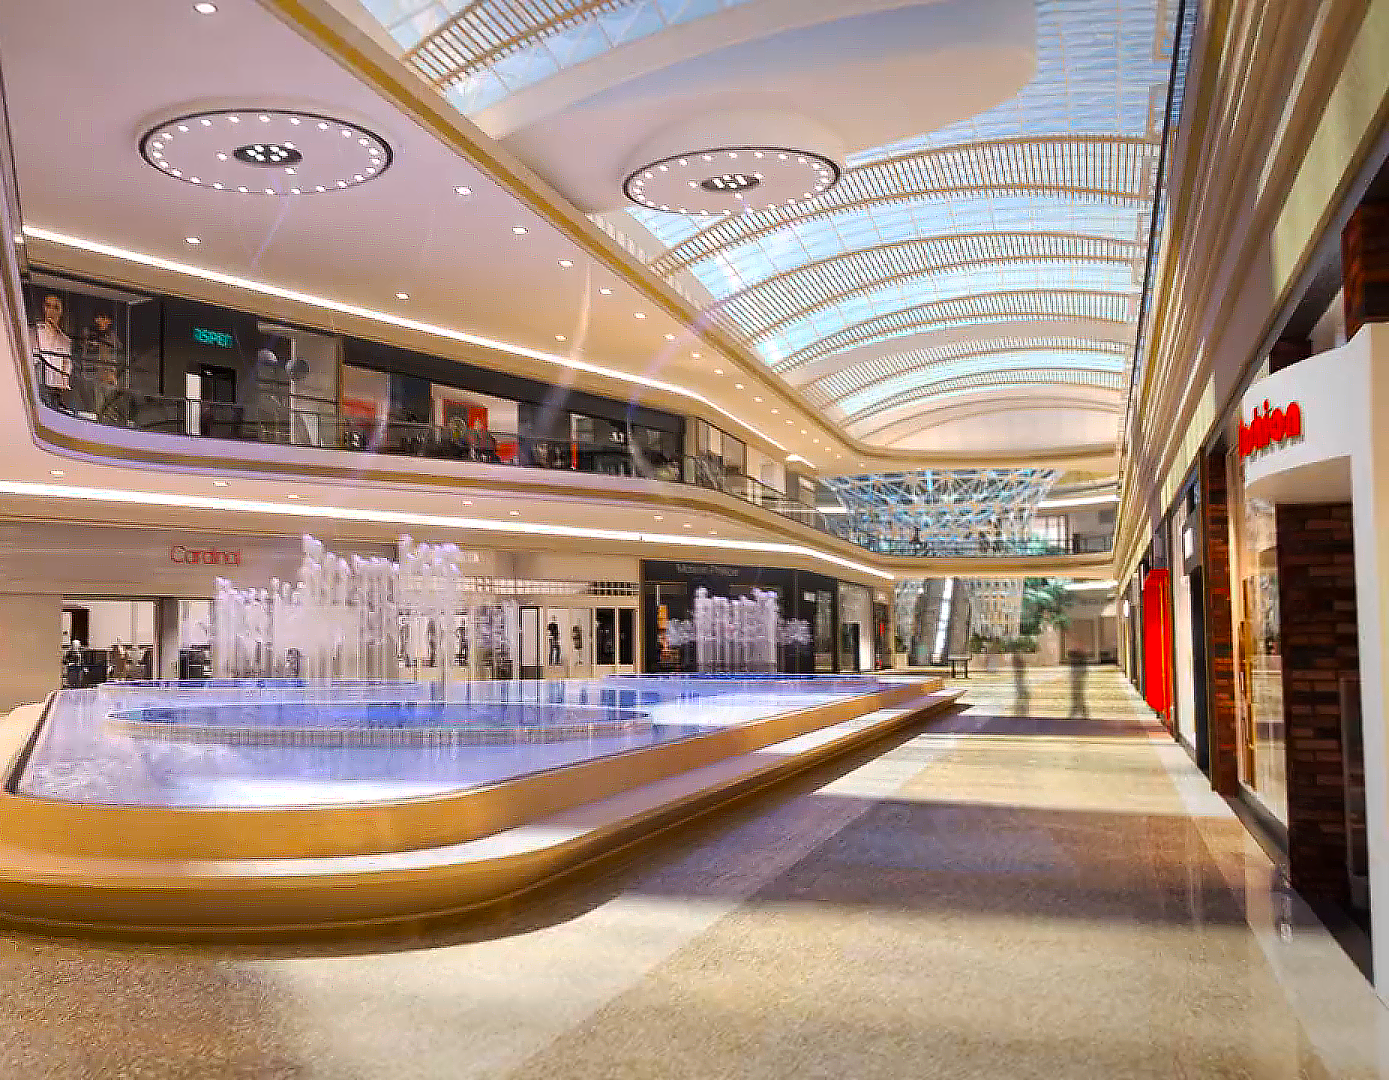 This still shot from Trinity Animation's mall renderings displays a view of from a pedestrian's perspective. This particular image incorporates the fountains, ceiling, as well as the large sculpture at the far end of the mall.